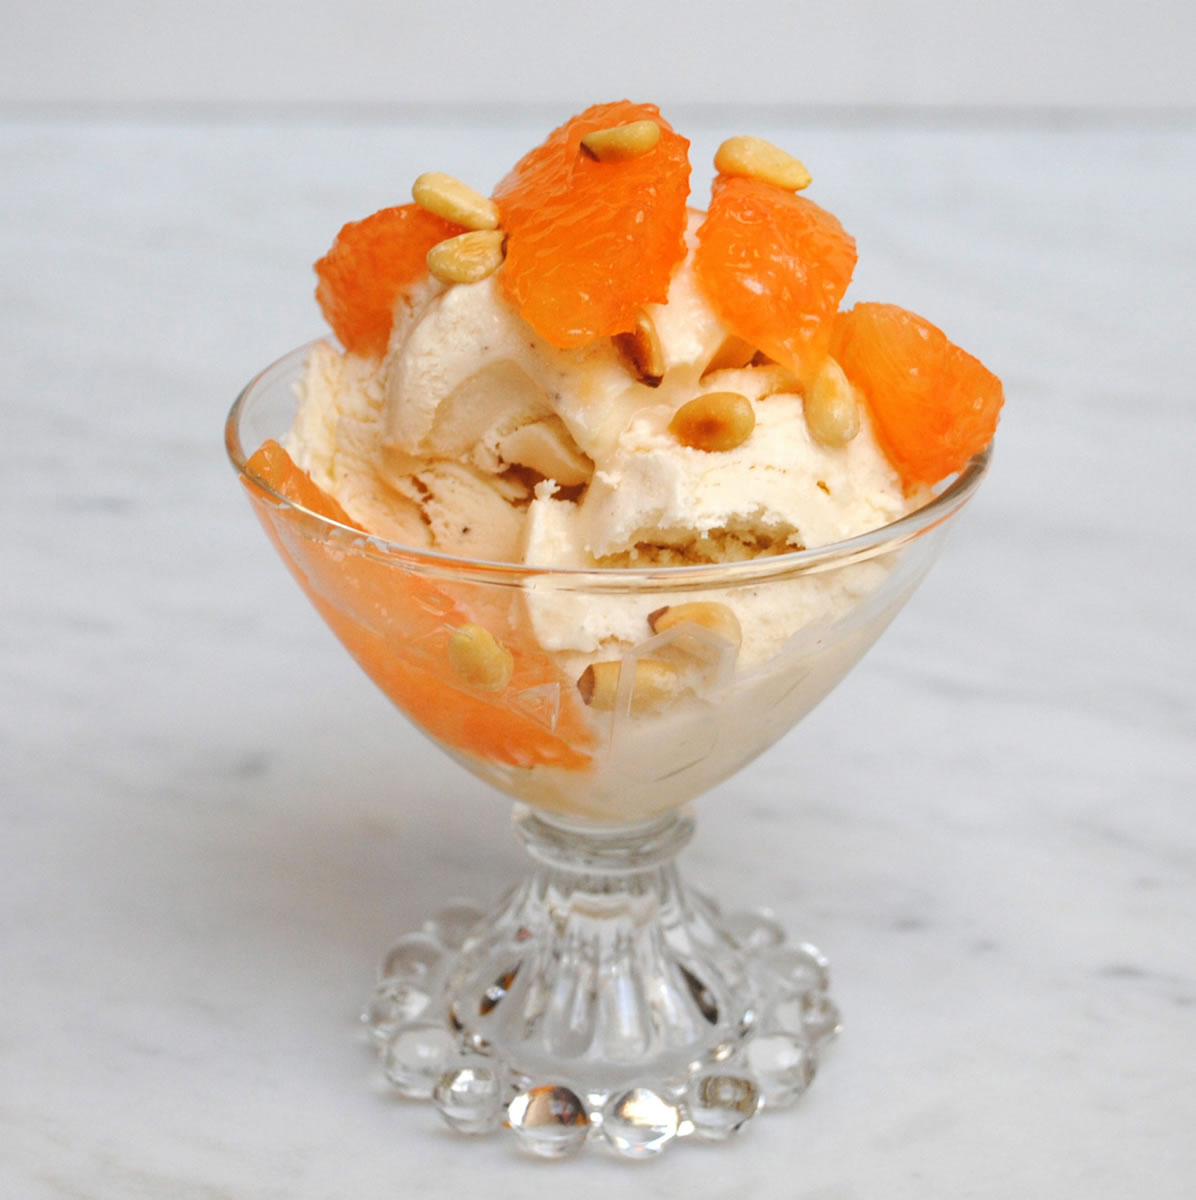 Top vanilla ice cream with some spiced grapefruit compote and a sprinkling of toasted pine nuts to make a winter sundae.